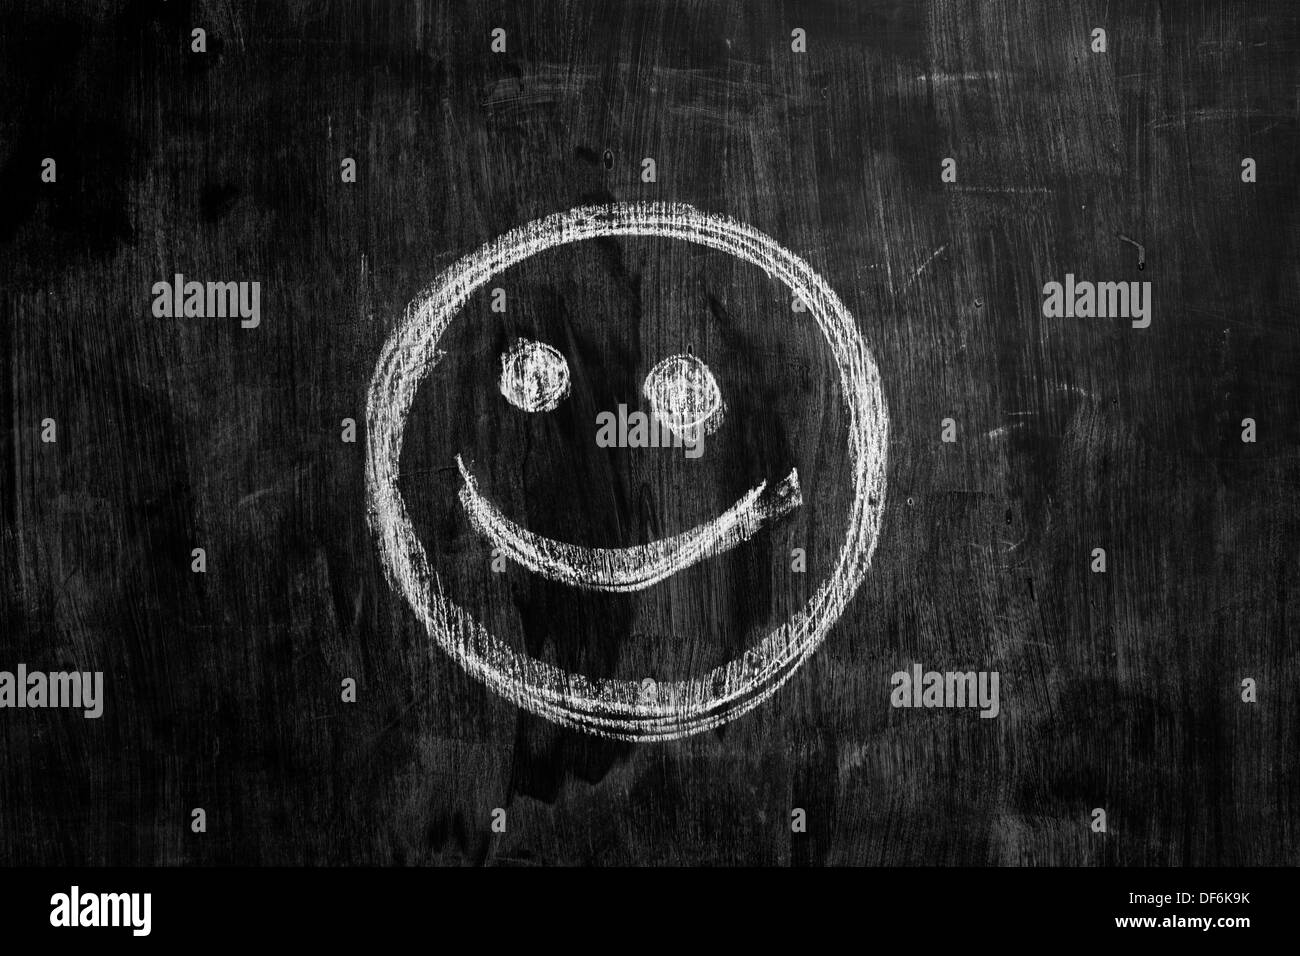 Chalk drawing of smiley face on a blackboard Stock Photo